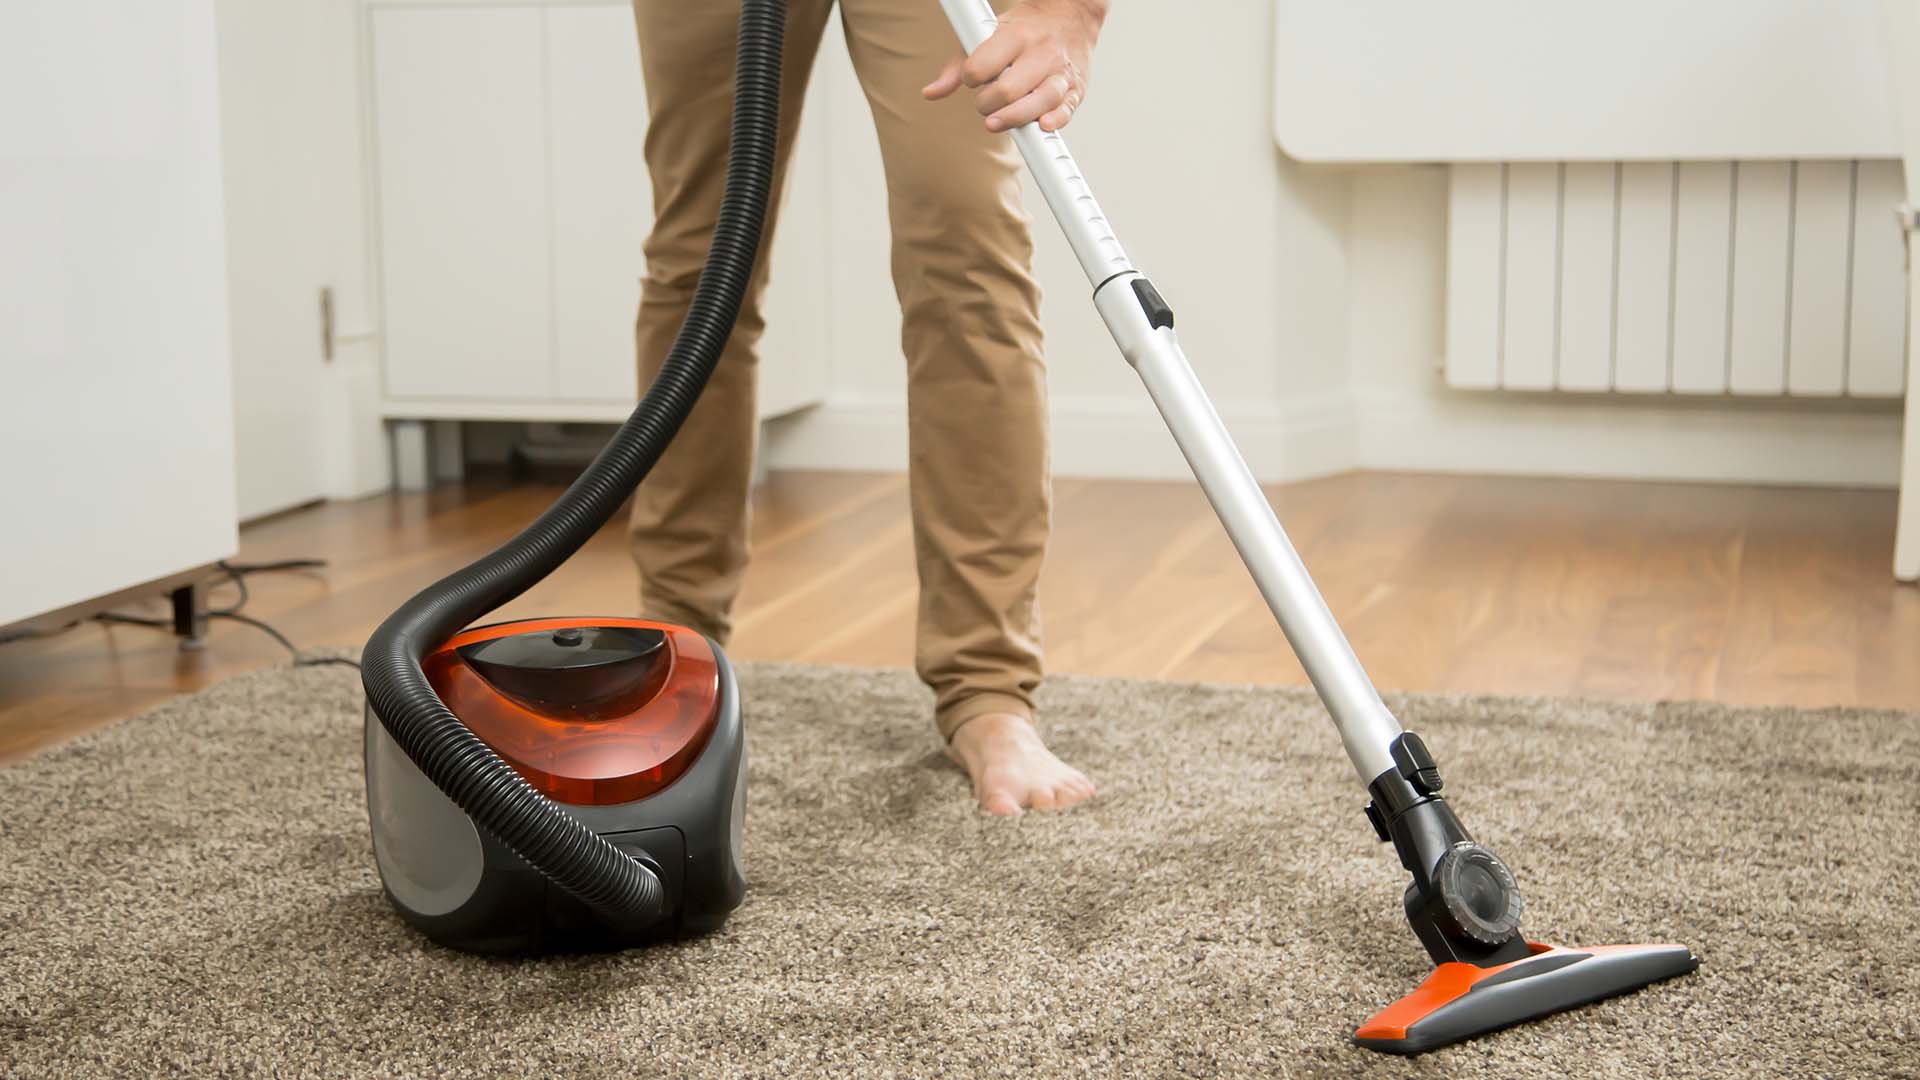 Lower body of a man wearing beige trousers holding a hoover and using it on a carpet. He is barefoot on the carpet.